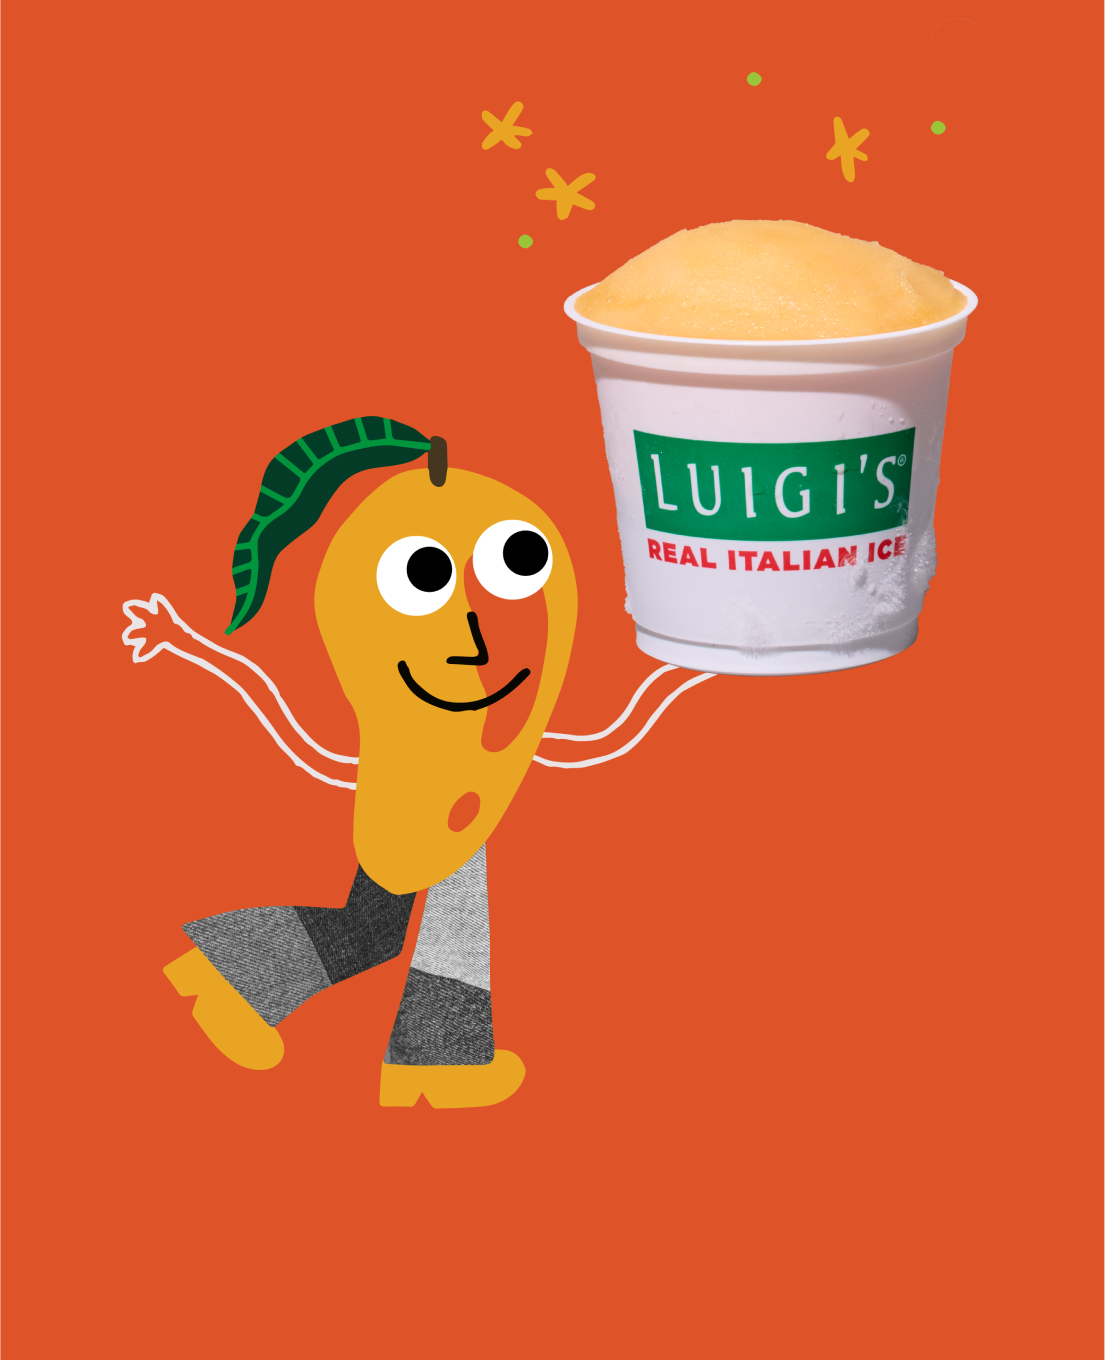 Mango graphic character is smiling and holding a cup of mango LUIGI'S Real Italian Ice. Orange background and light orange stars around cup. Mango is wearing pants and shoes and has a leaf for hair.